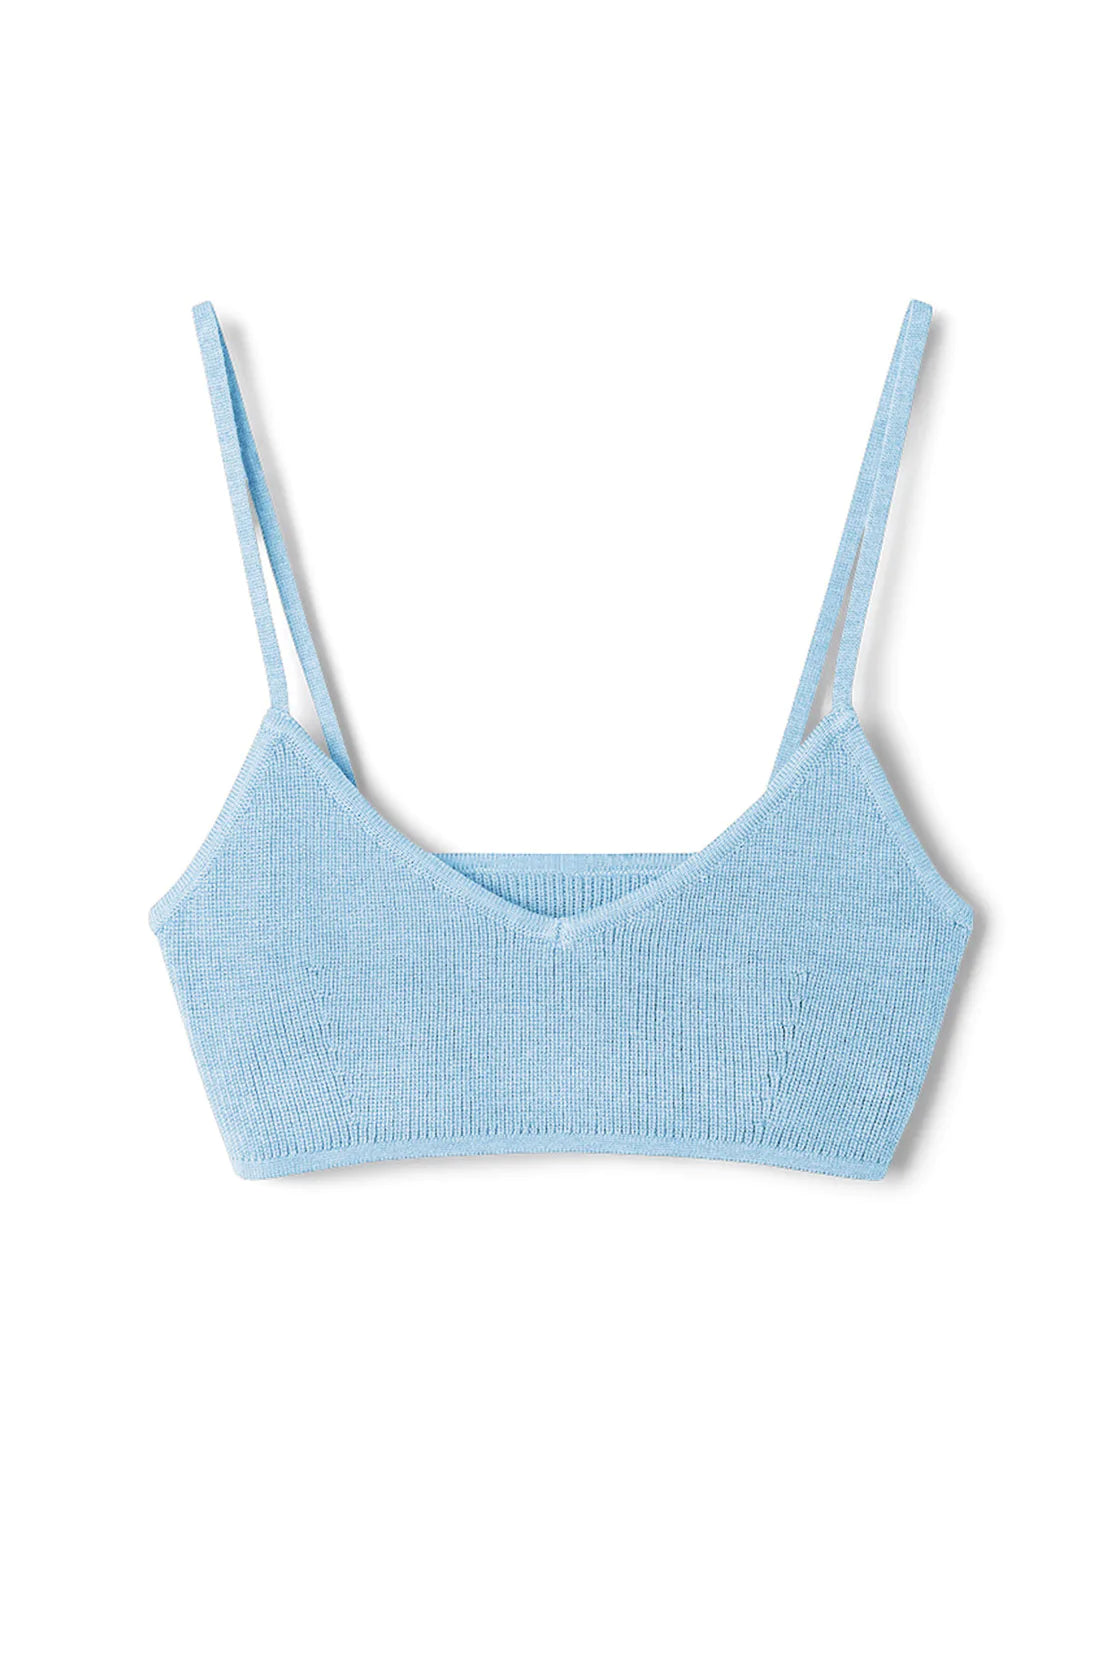 COOL BLUE KNITTED BRALETTE